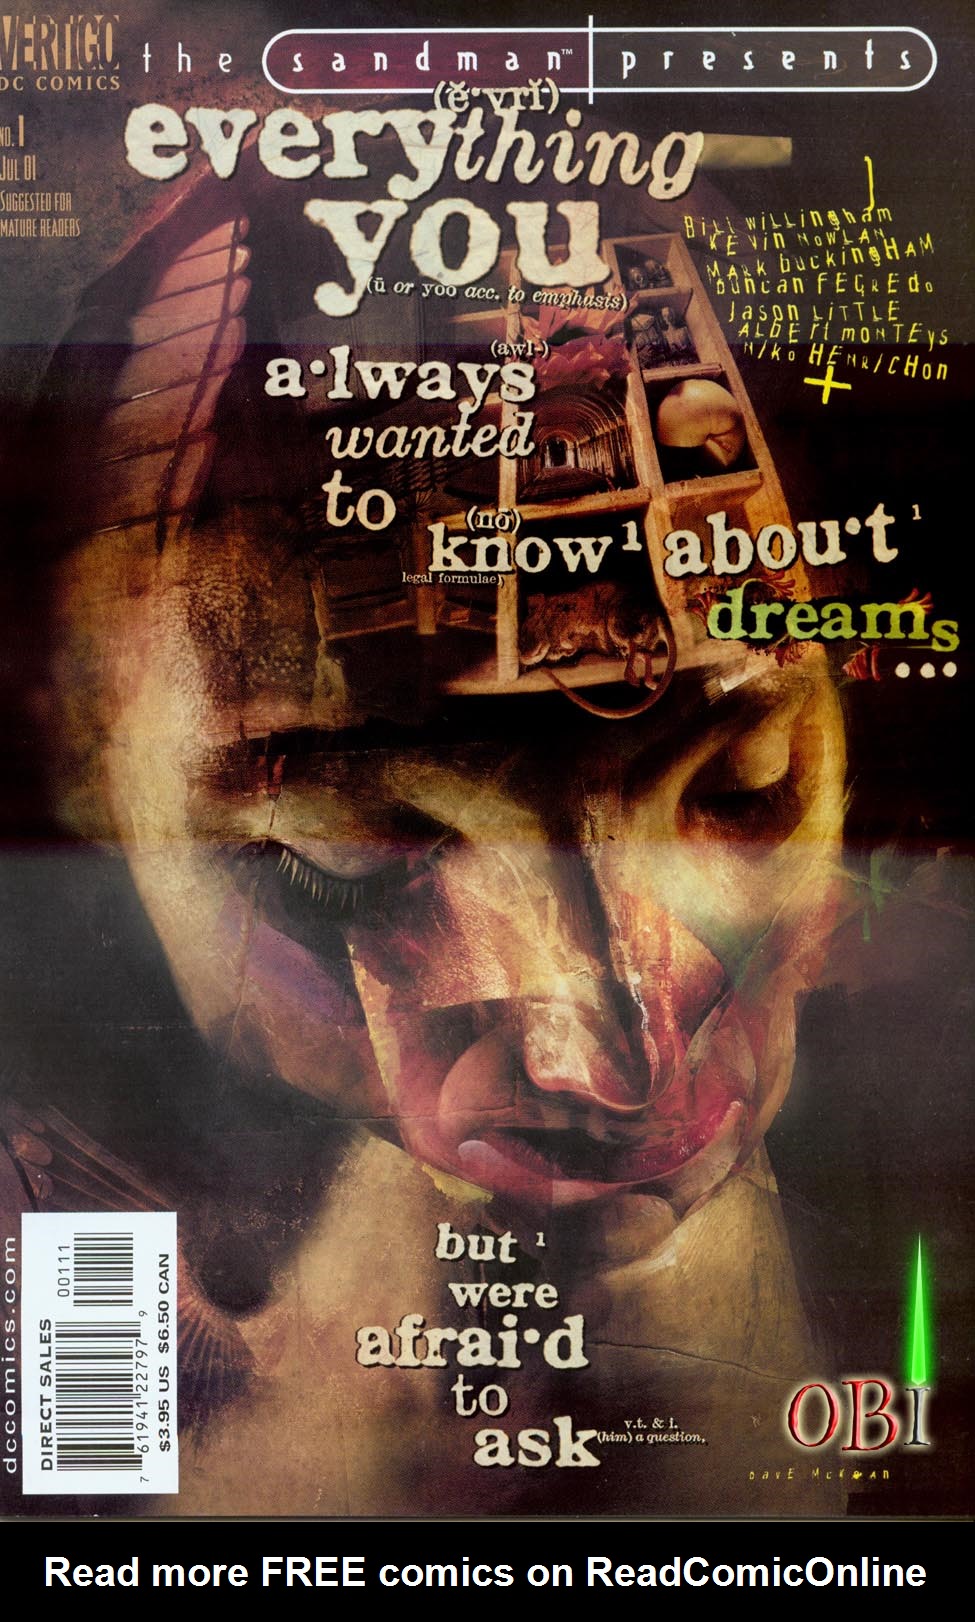 Read online The Sandman Presents: Everything You Always Wanted to Know About Dreams...But Were Afraid to Ask comic -  Issue # Full - 1